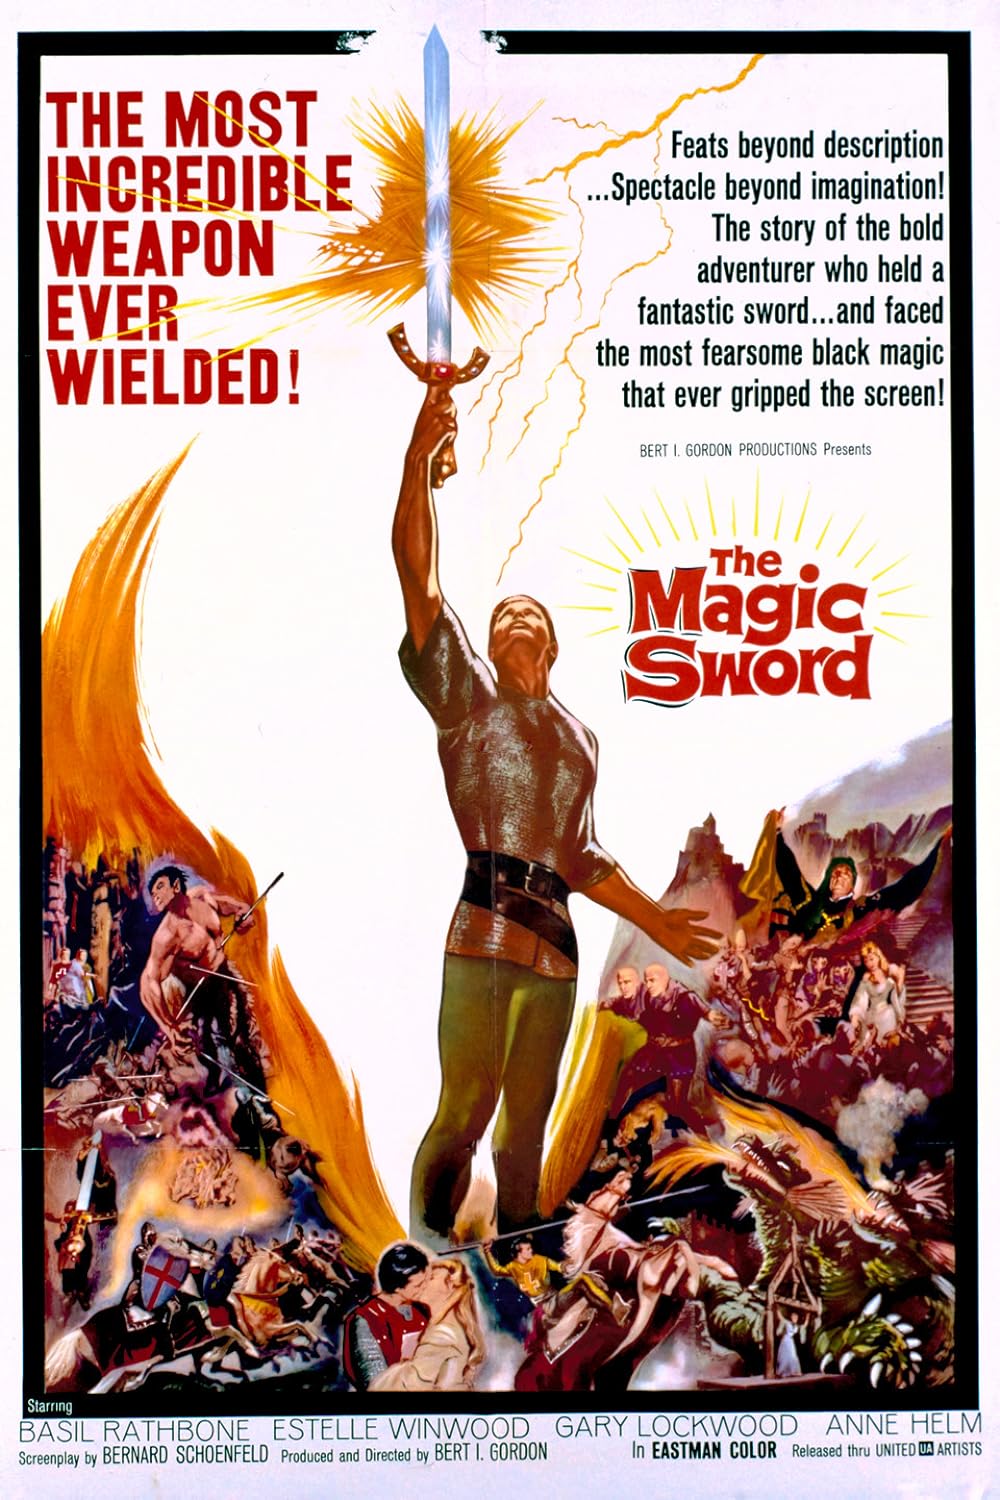 The theatrical poster for The Magic Sword (1962) featuring dramatic scenes from the film and Sir George brandishing Ascalon, the titular magic sword.